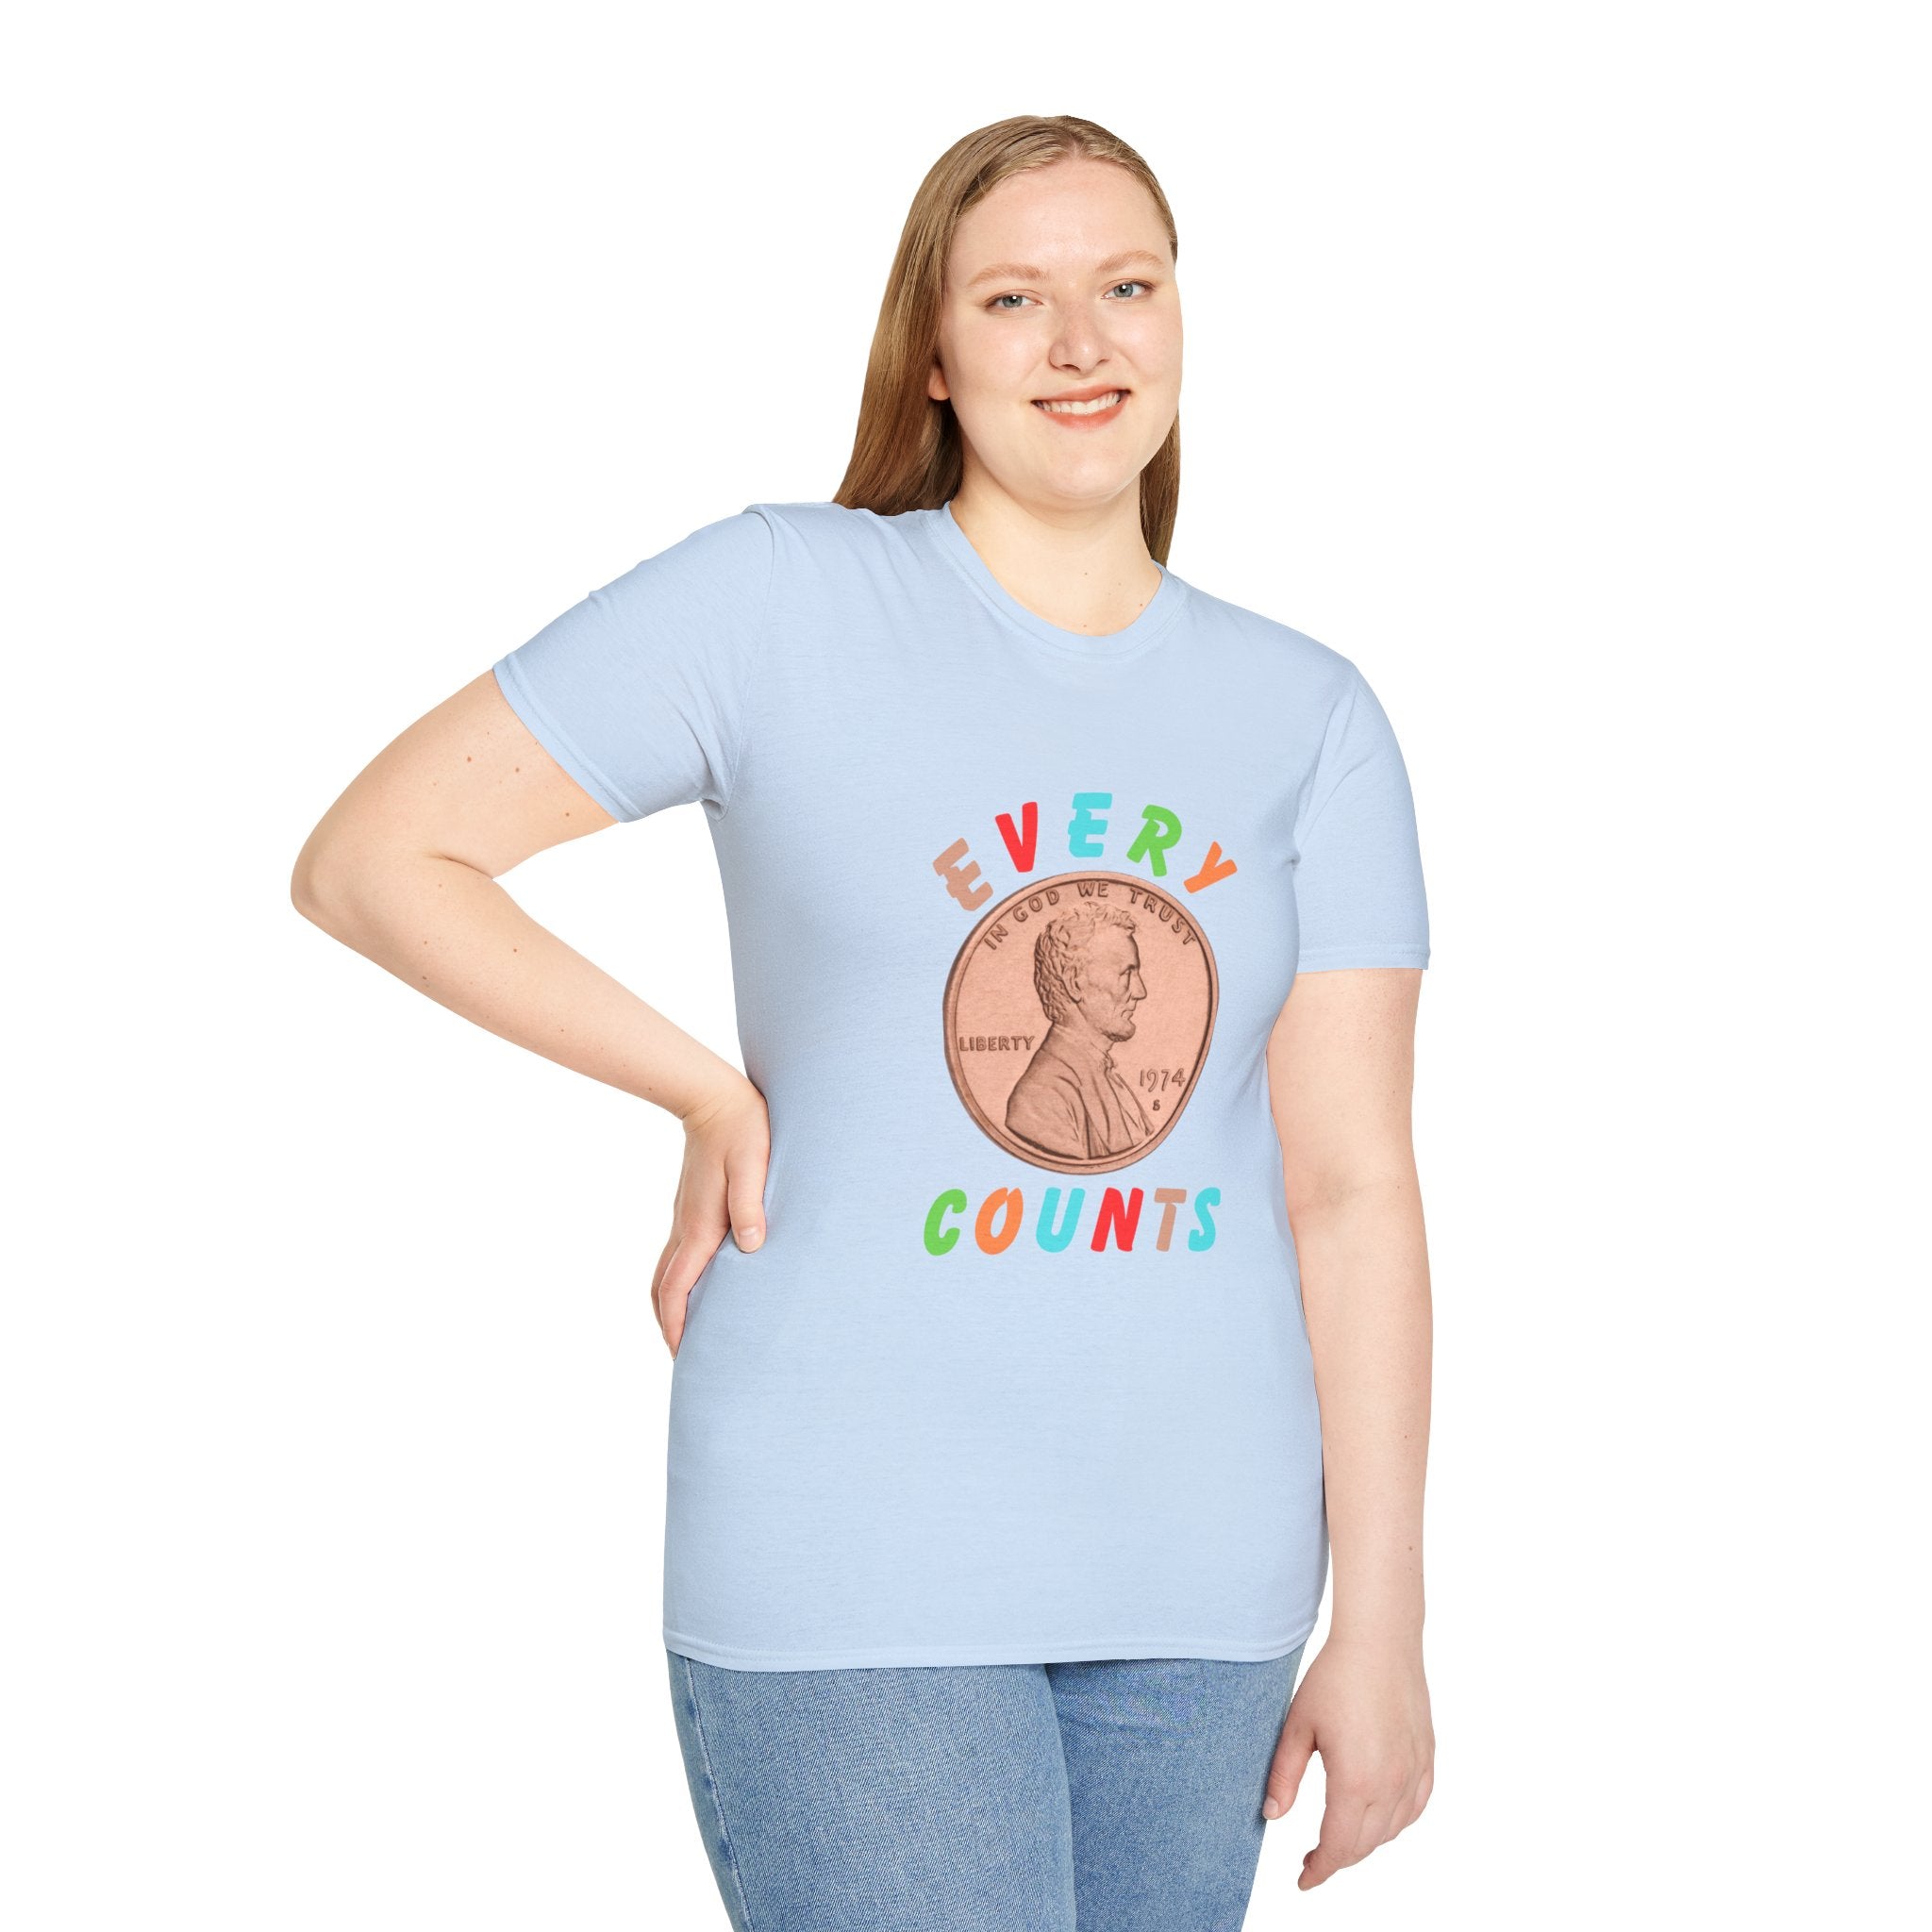 Every Penny Counts Unisex Softstyle T-Shirt, Women's T-Shirt, Men's T-Shirt, Gift for Women, Gift for Men